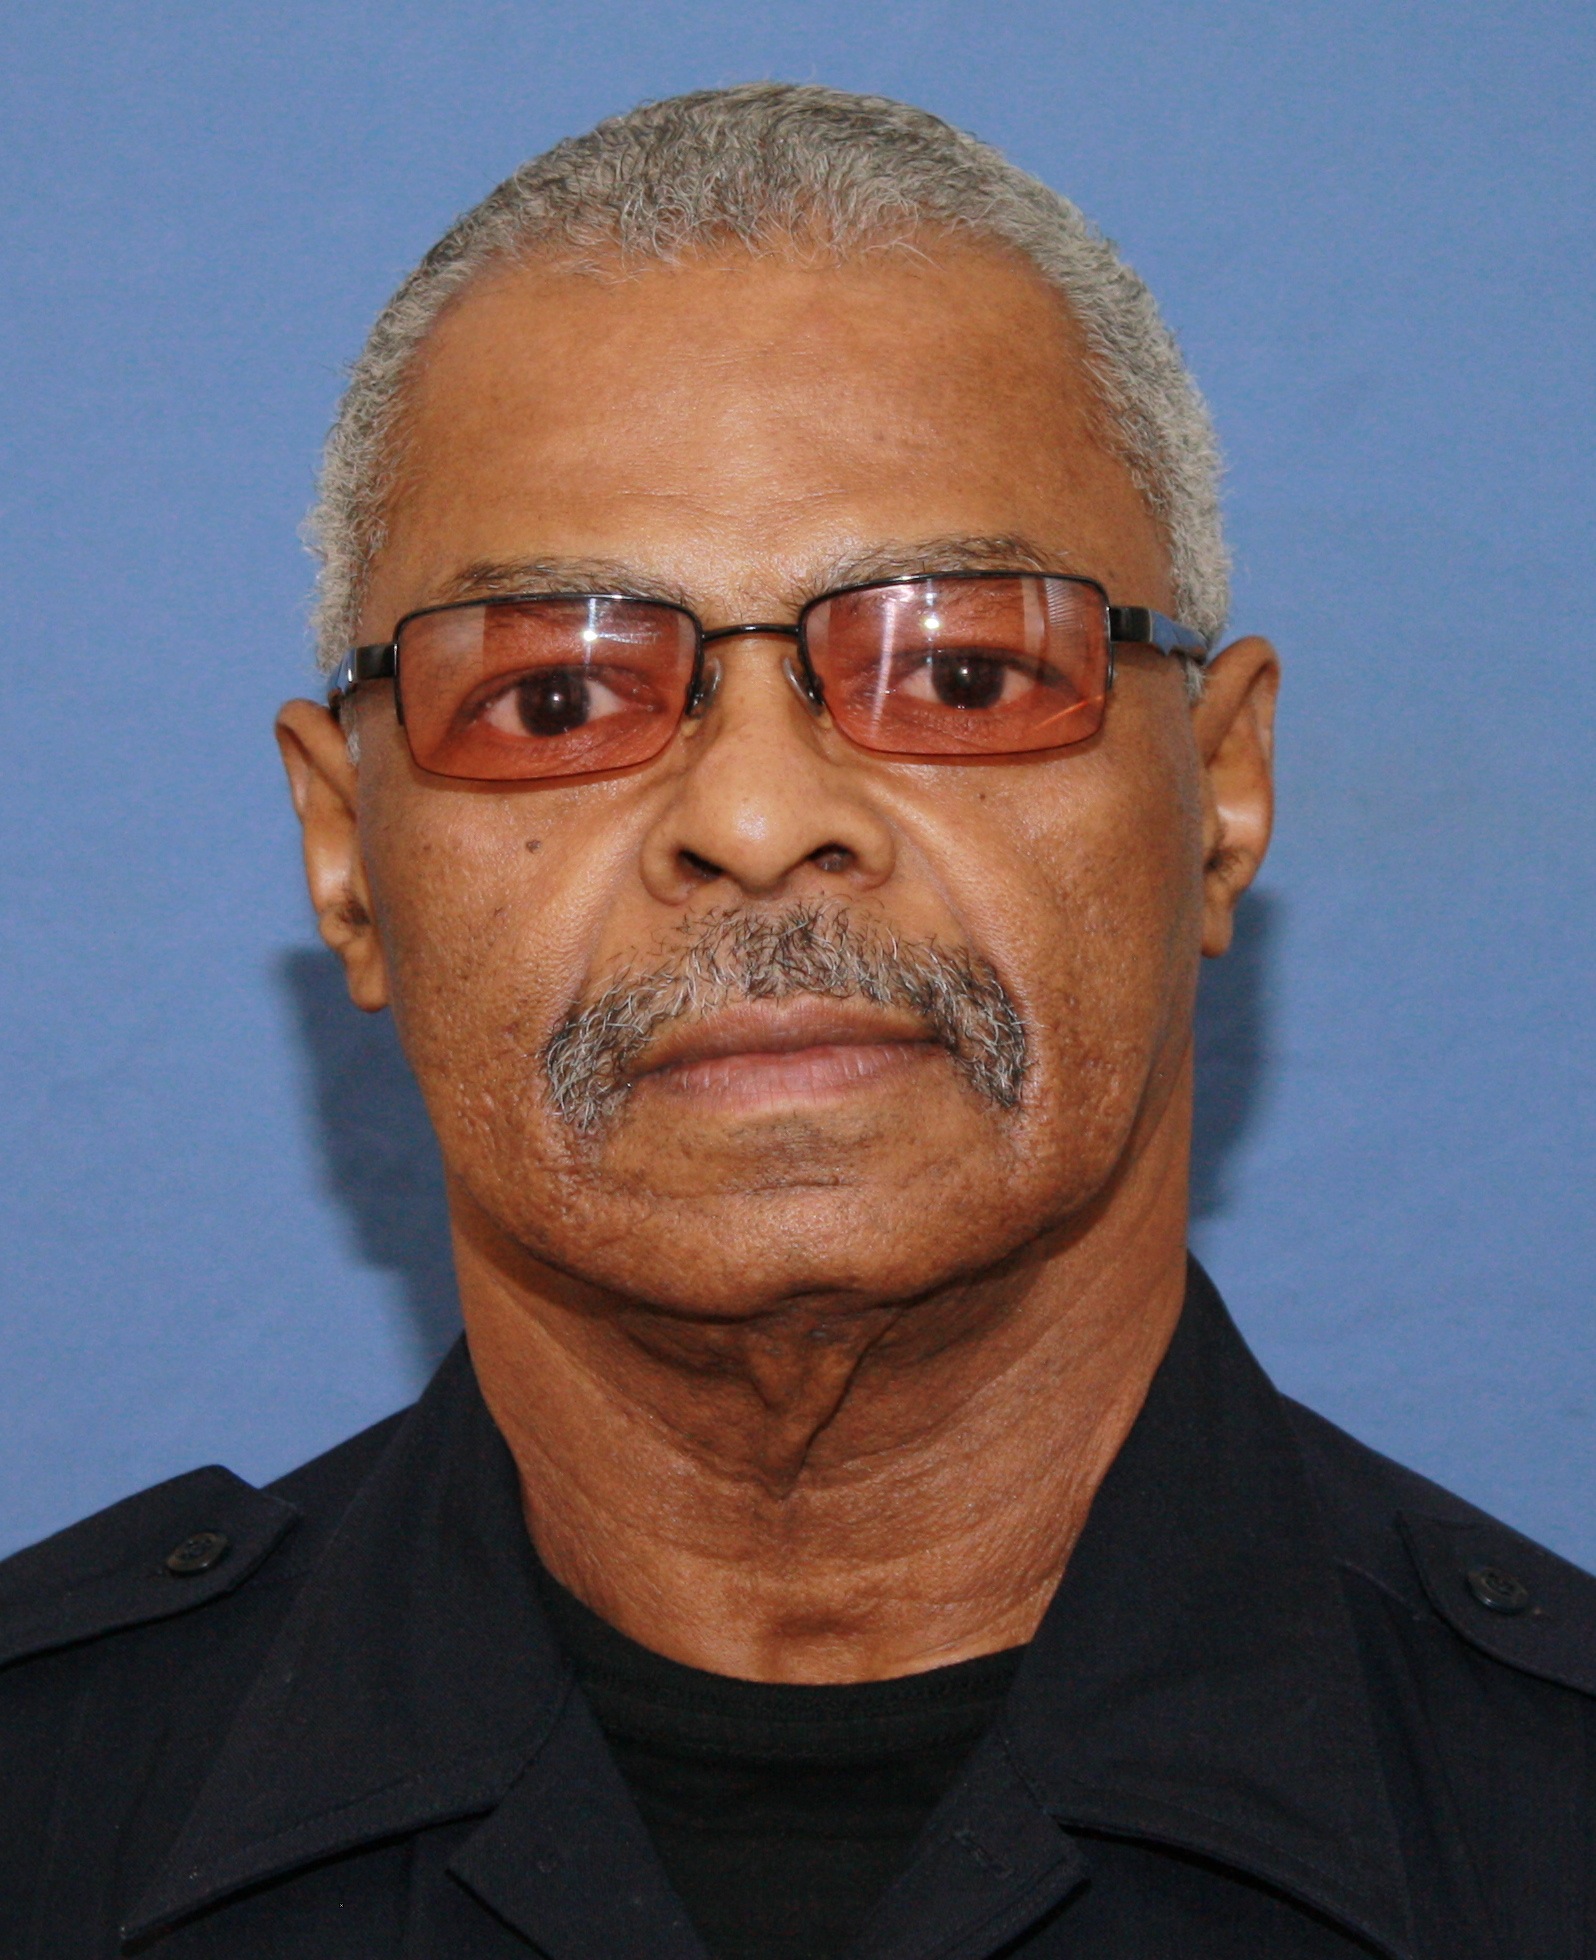 Police Officer Ronald A. Leisure | United States Department of Veterans Affairs Police Services, U.S. Government